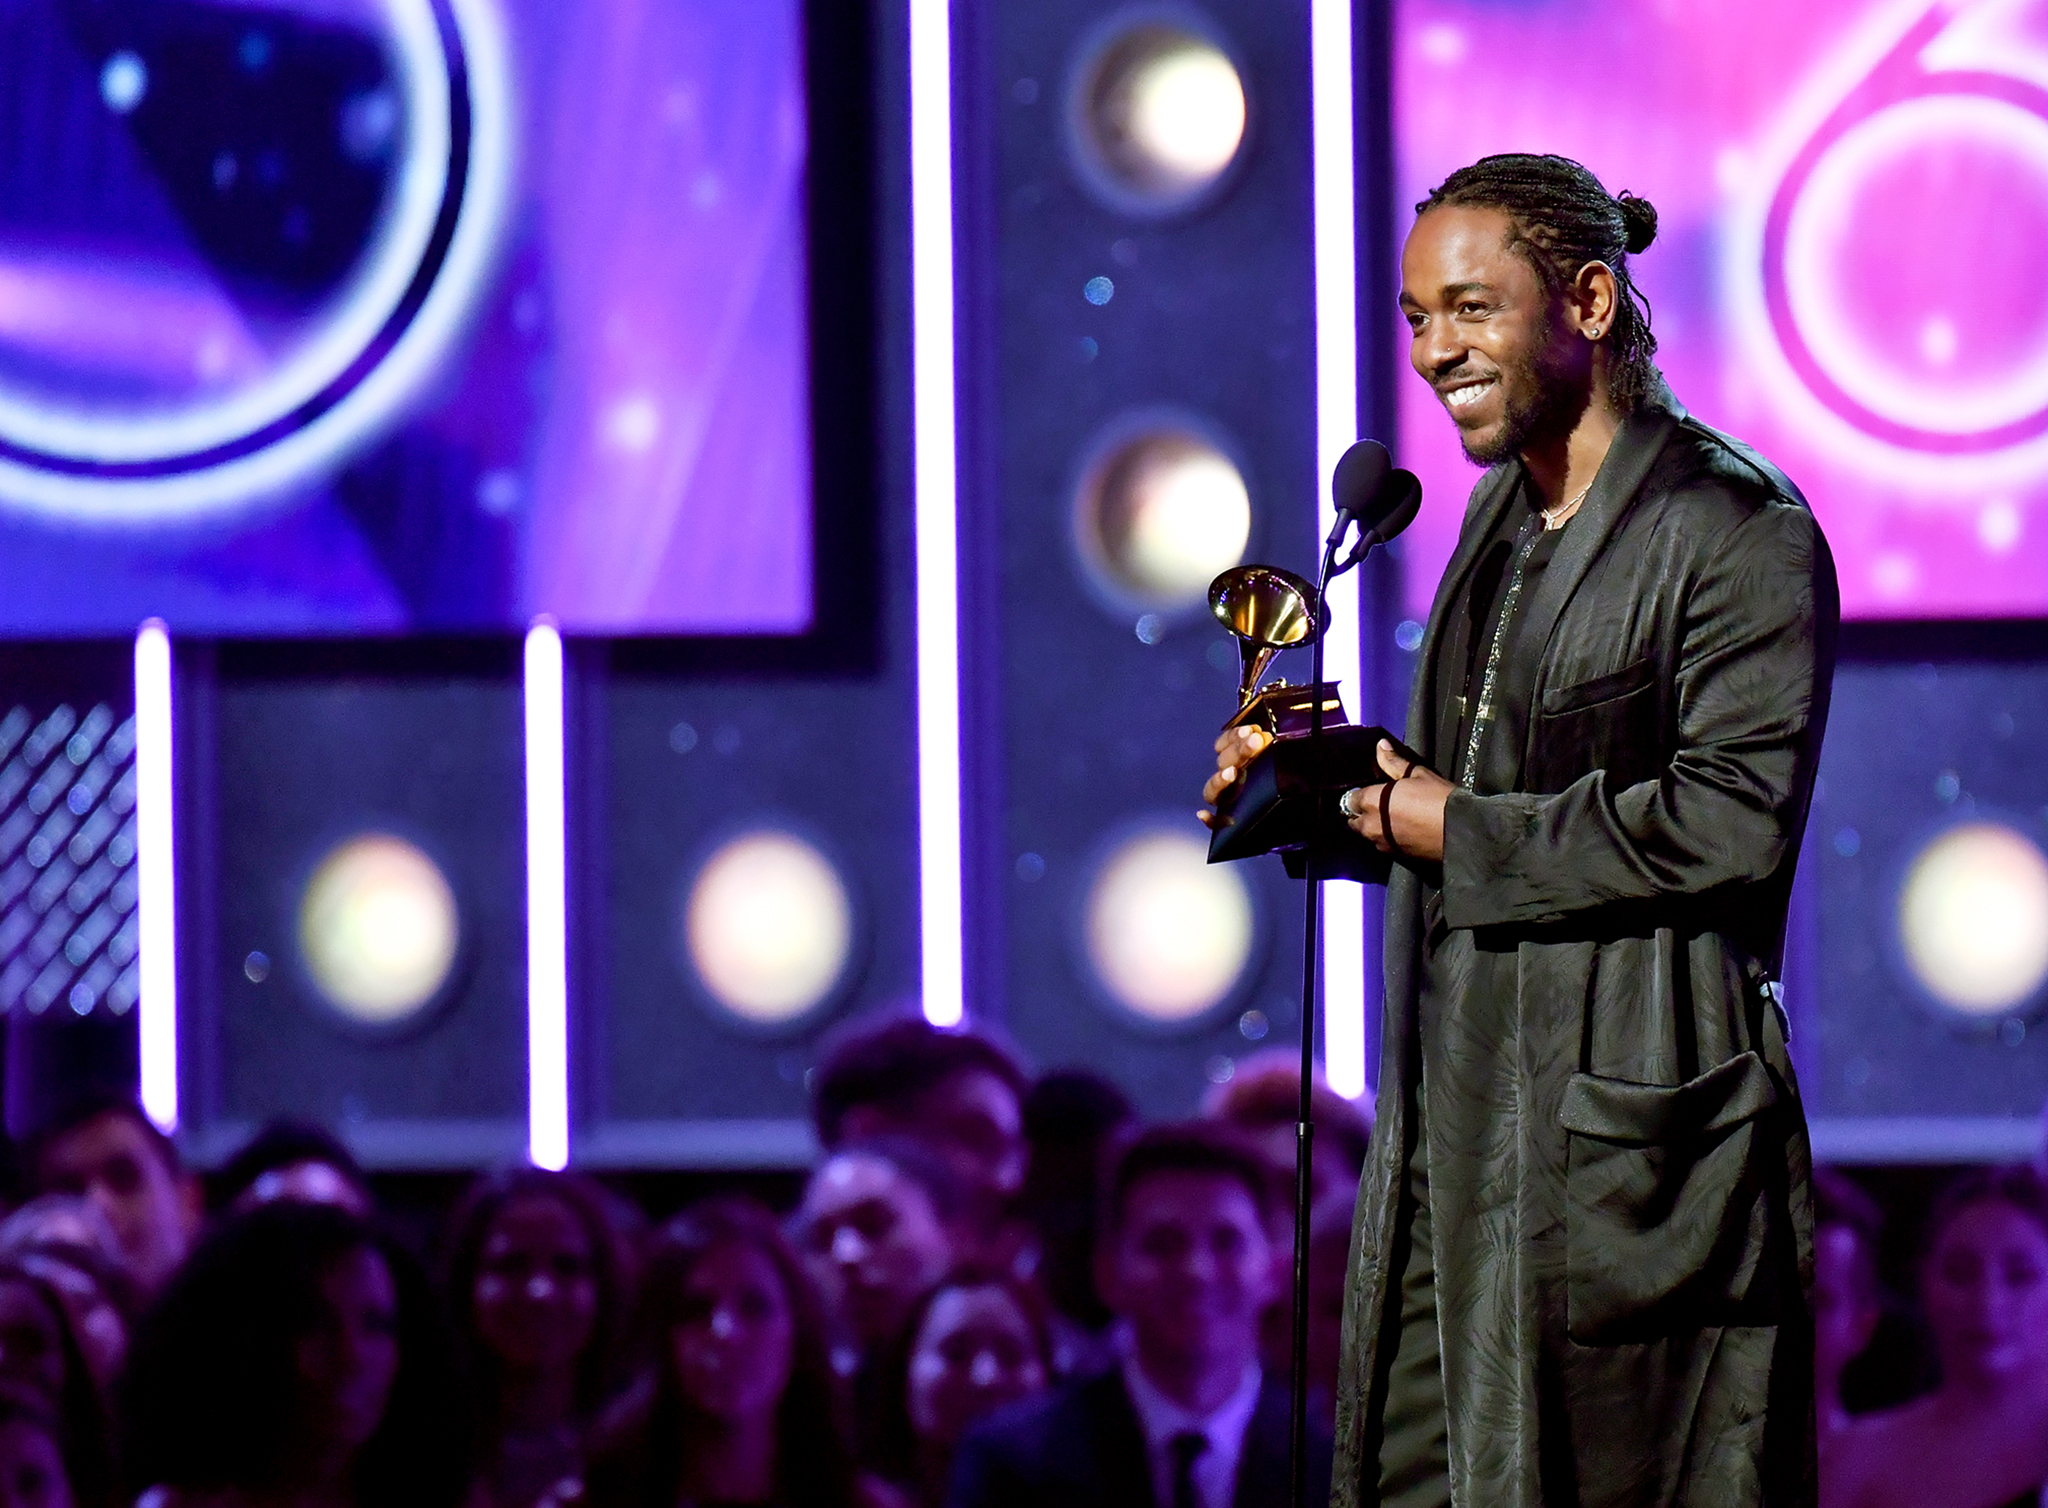 Recording artist Kendrick Lamar accepts award for Best Rap Album onstage during the 60th Annual Grammy Awards at Madison Square Garden on Jan. 28, 2018 in New York City.